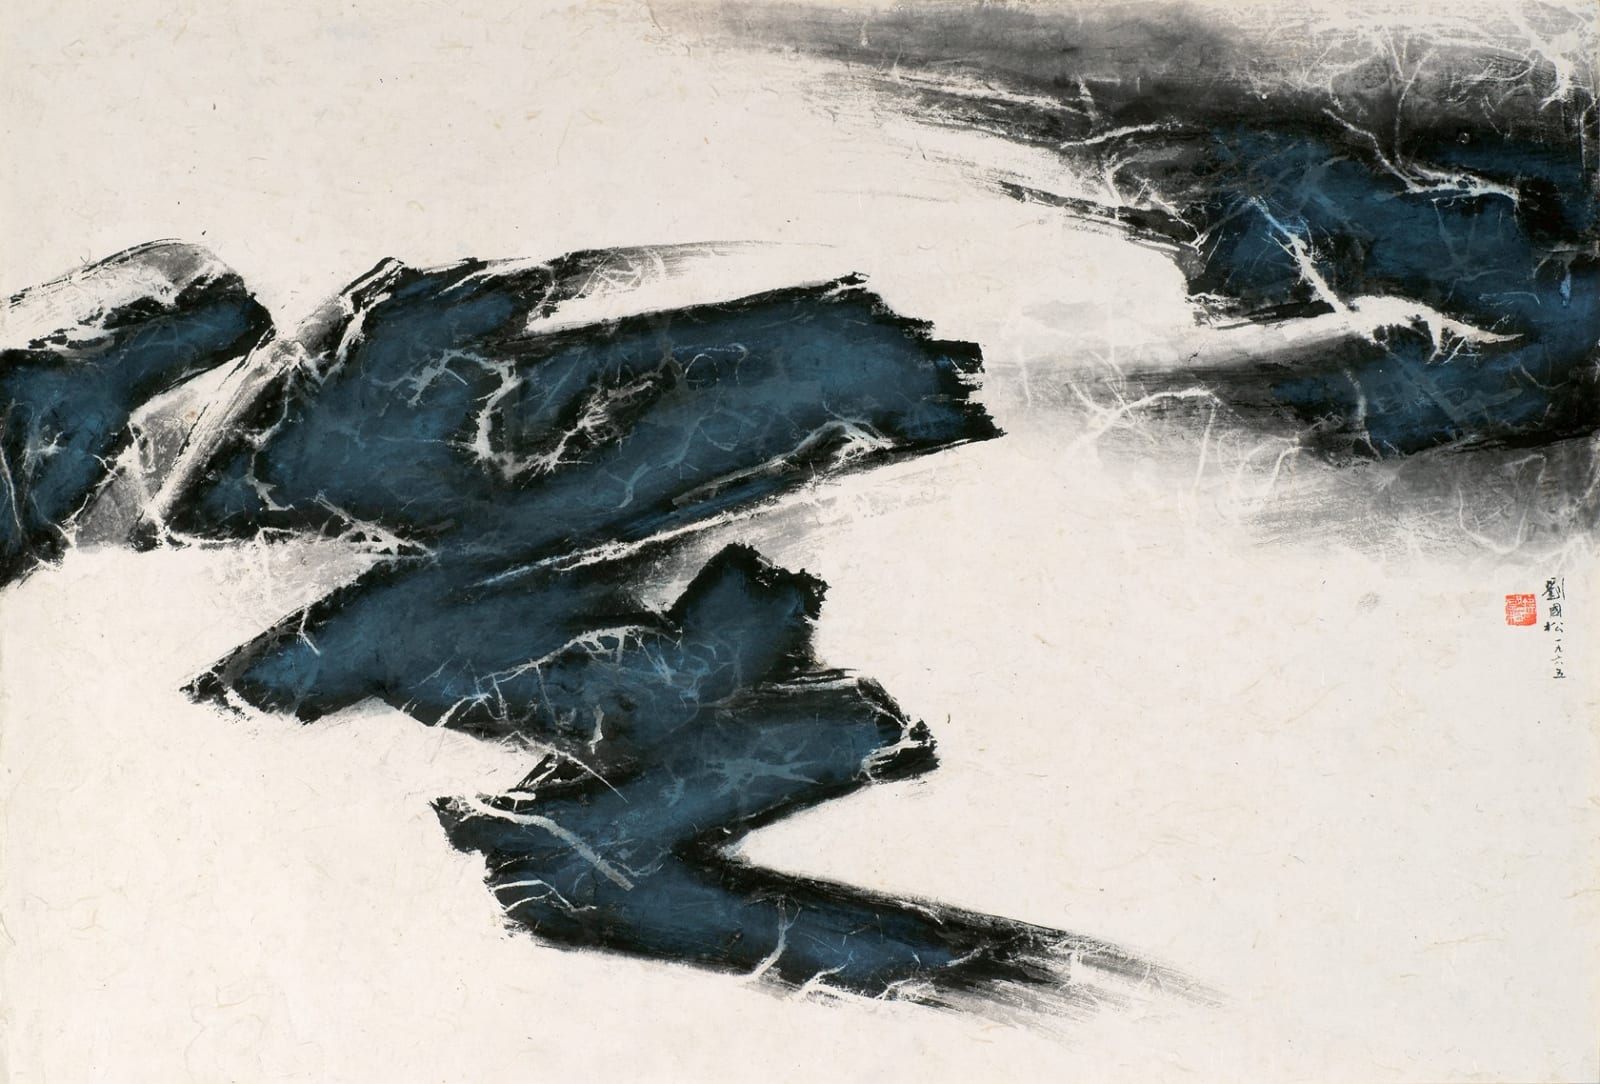 Liu Kuo-Sung 劉國松, Clear Conclusion of Clearness 澄者自澄, 1965